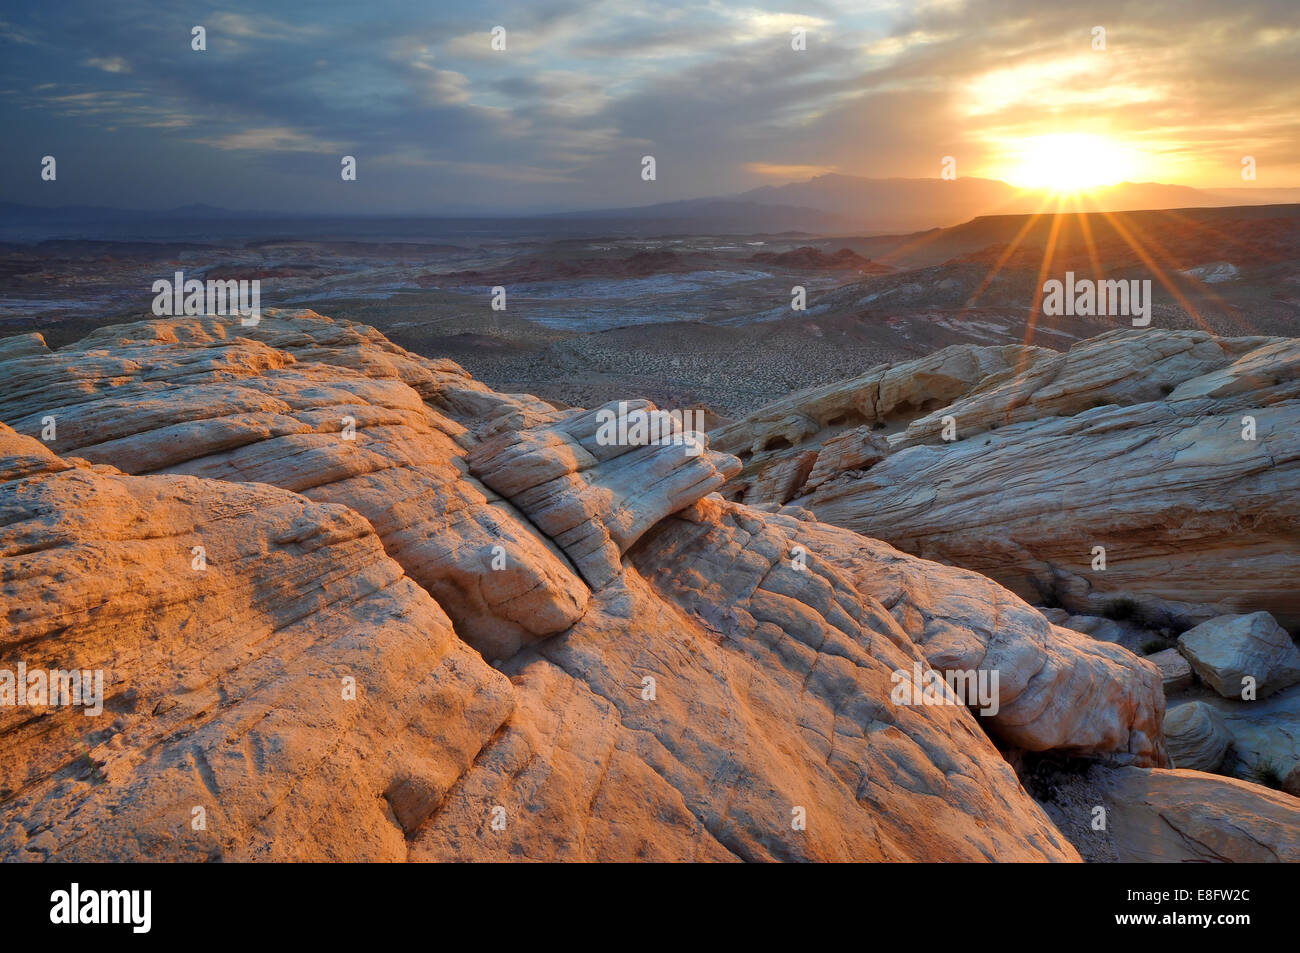 USA, Nevada, Valley of Fire State Park, Sunrise in Desert Banque D'Images